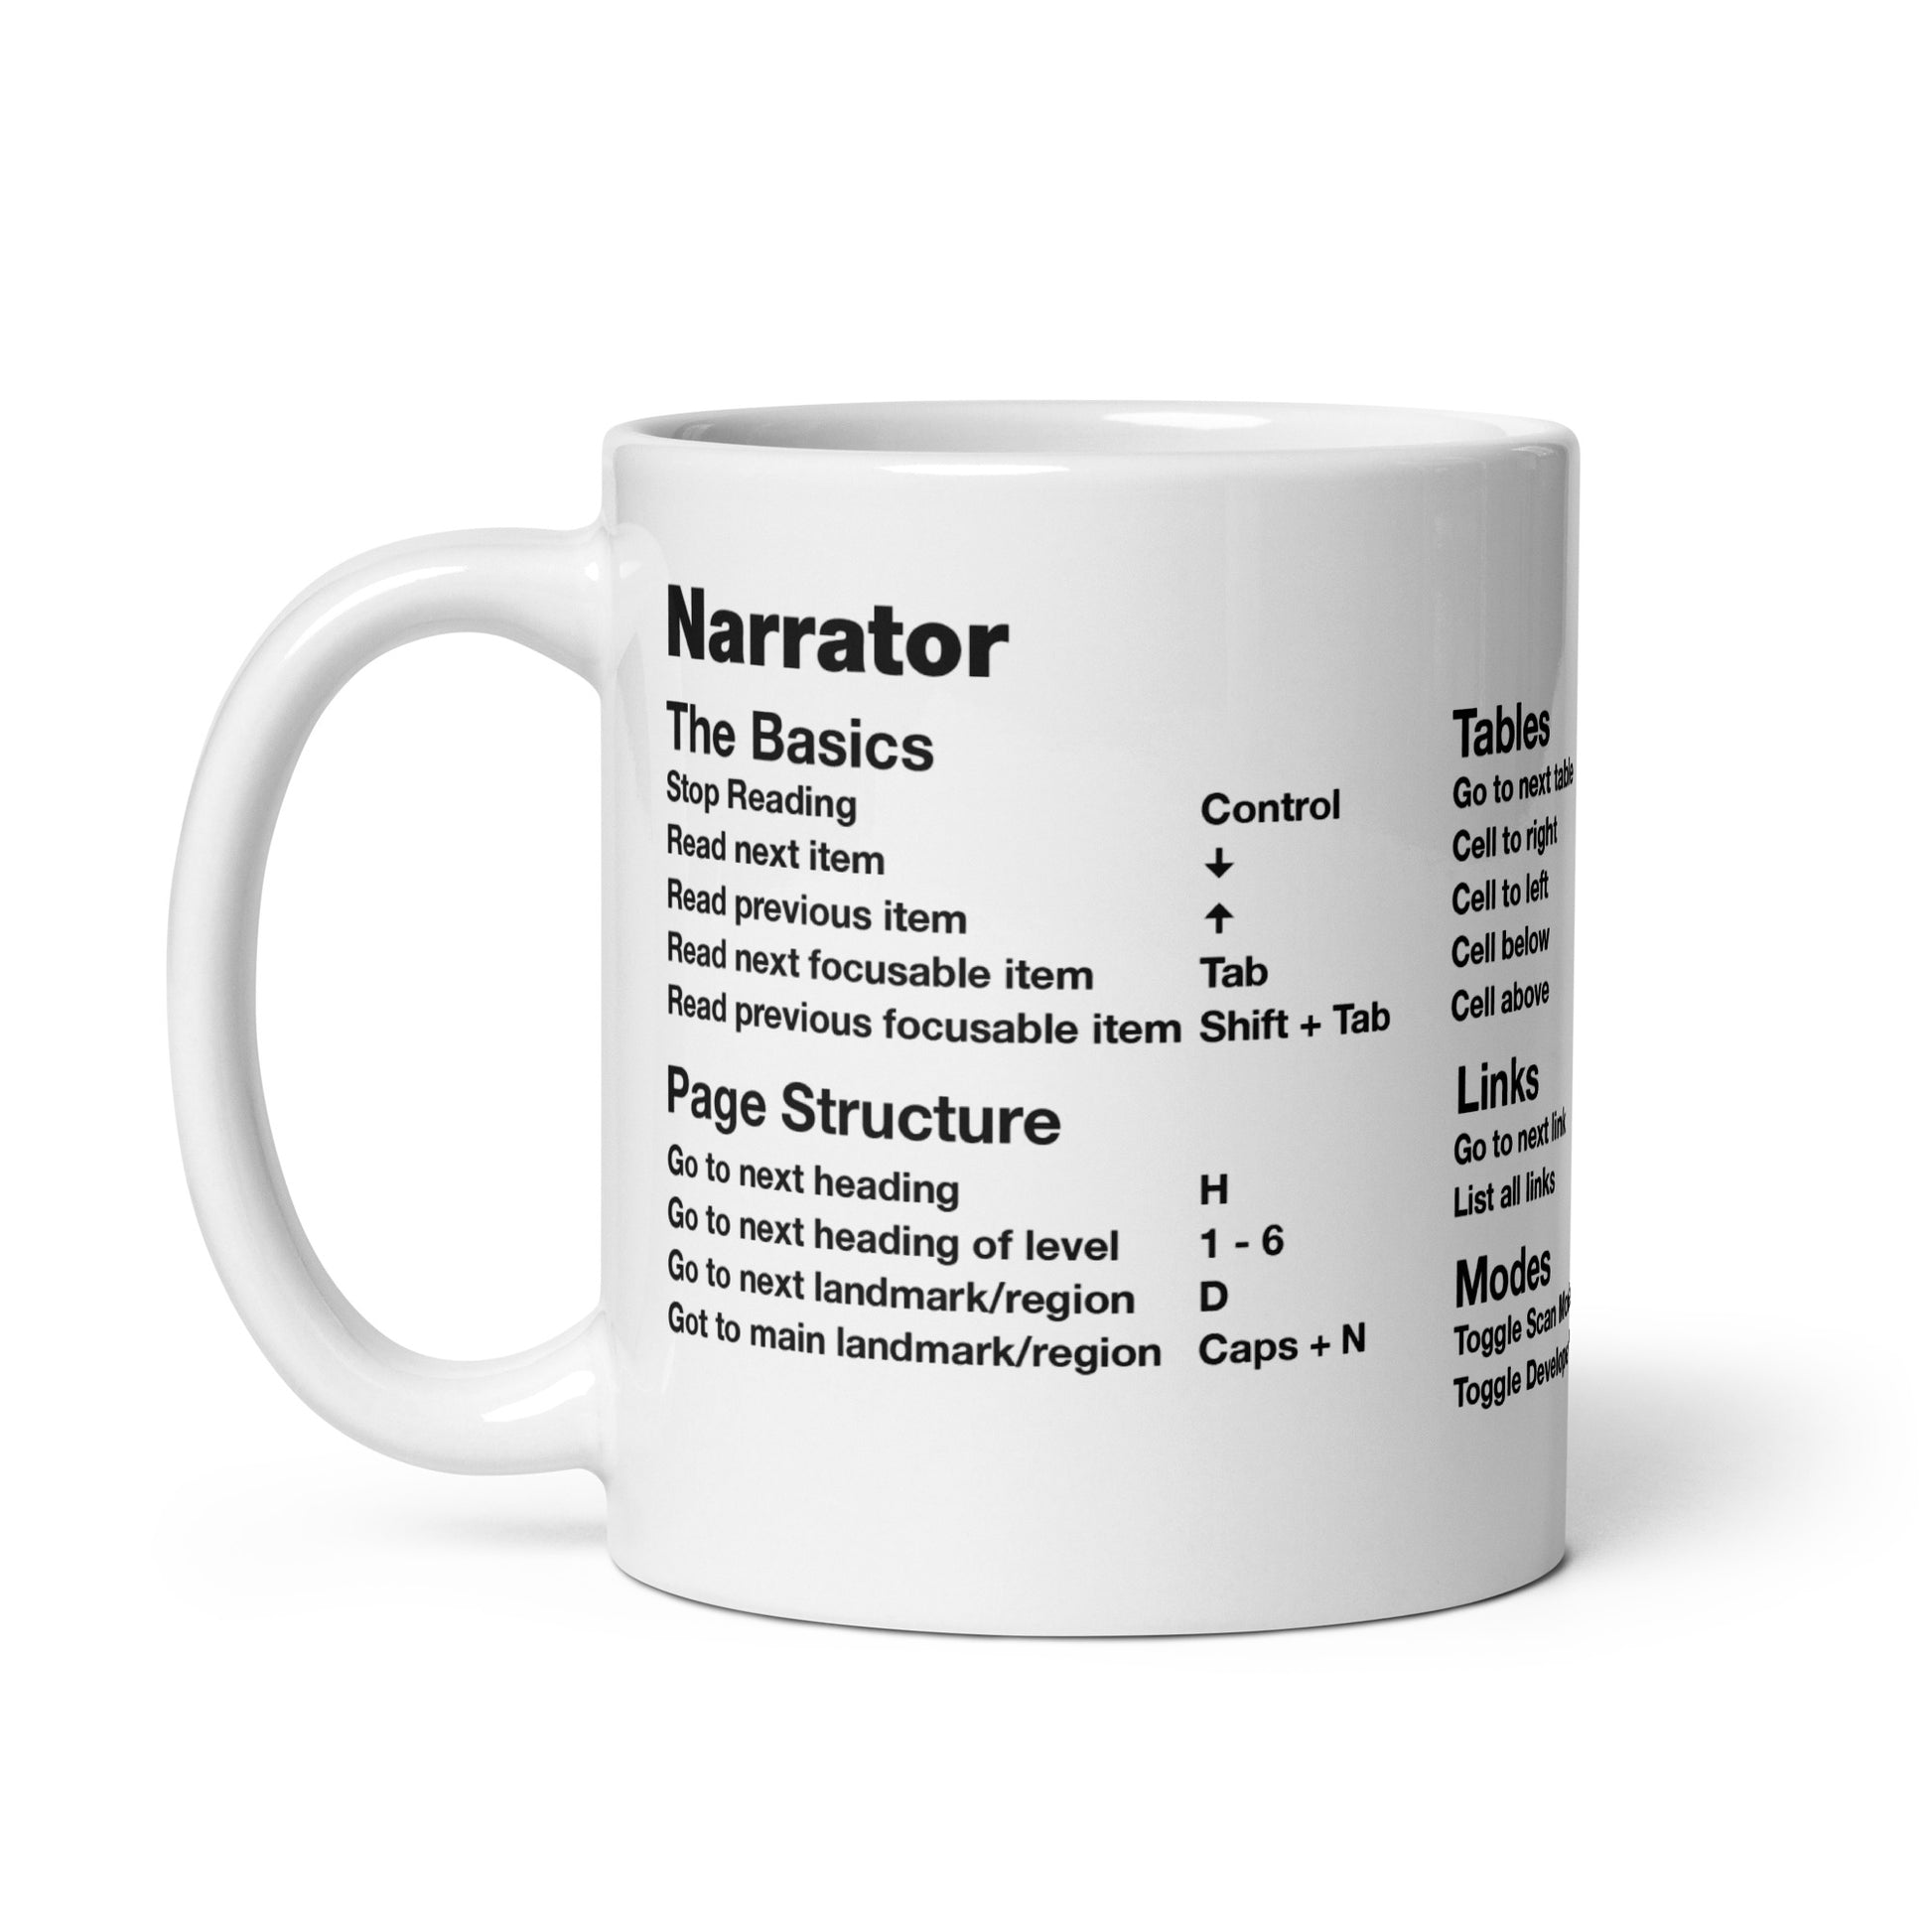 Narrator screen reader shortcut keys printed on white coffee mug. Left side features: The Basics and Page Structure.